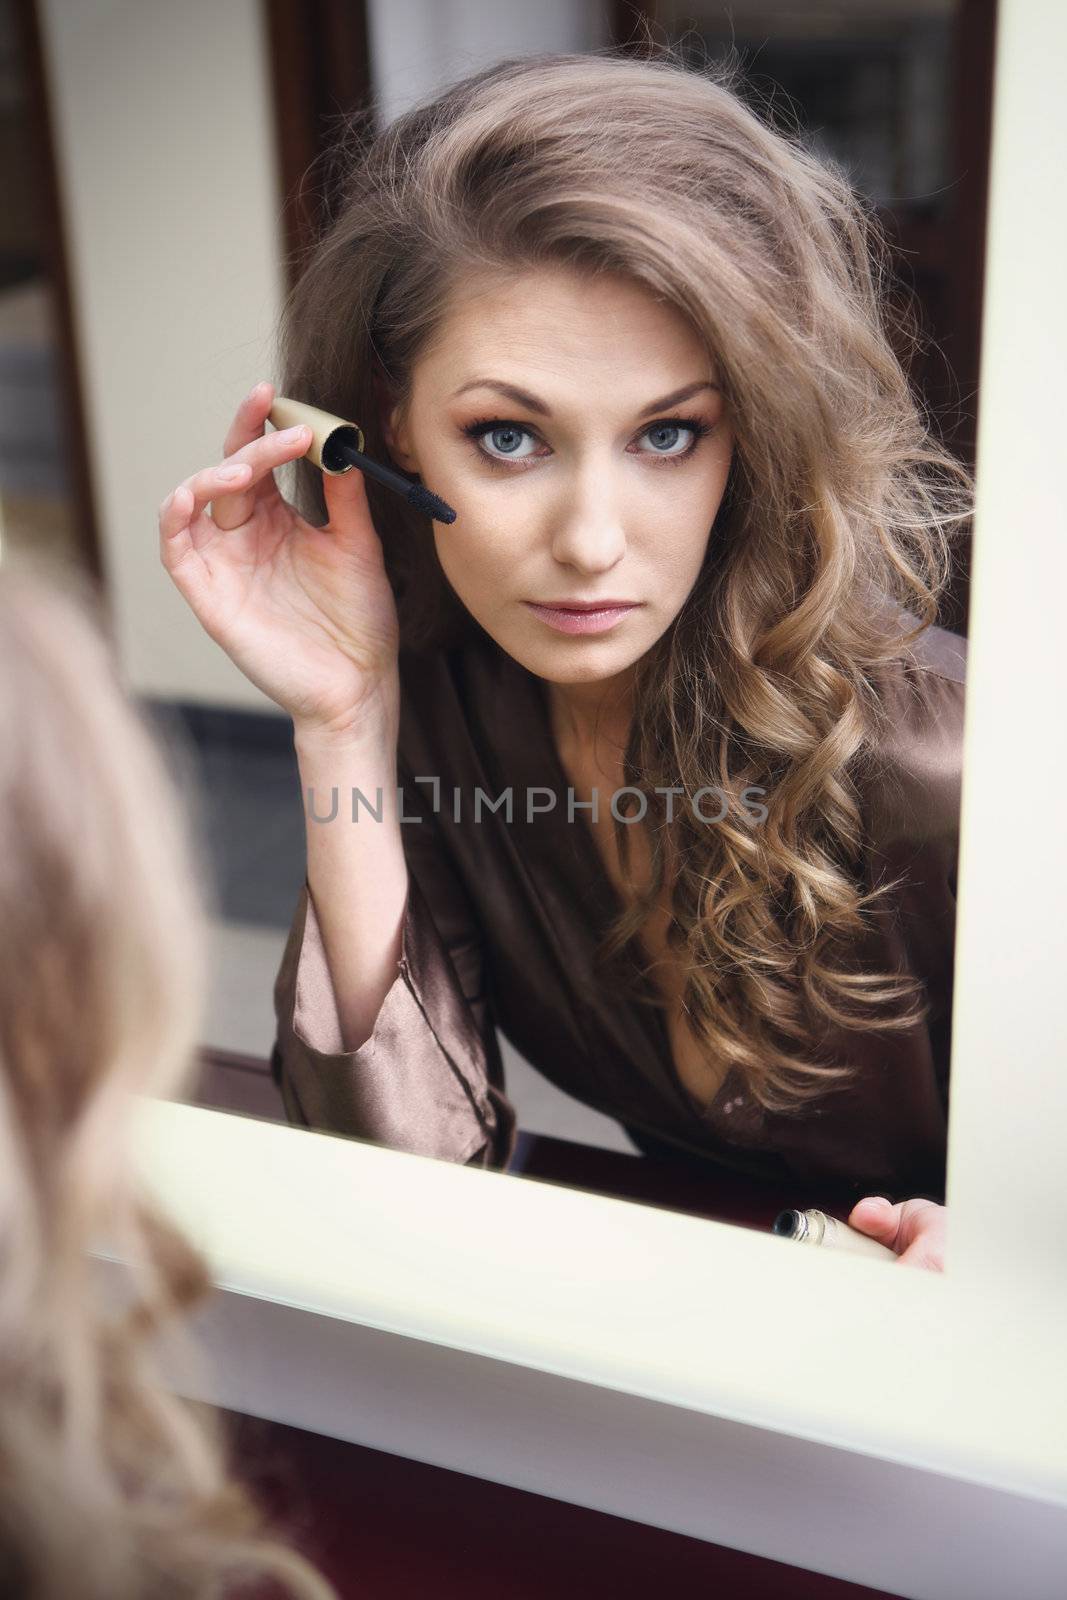 The young beautiful girl does makeup